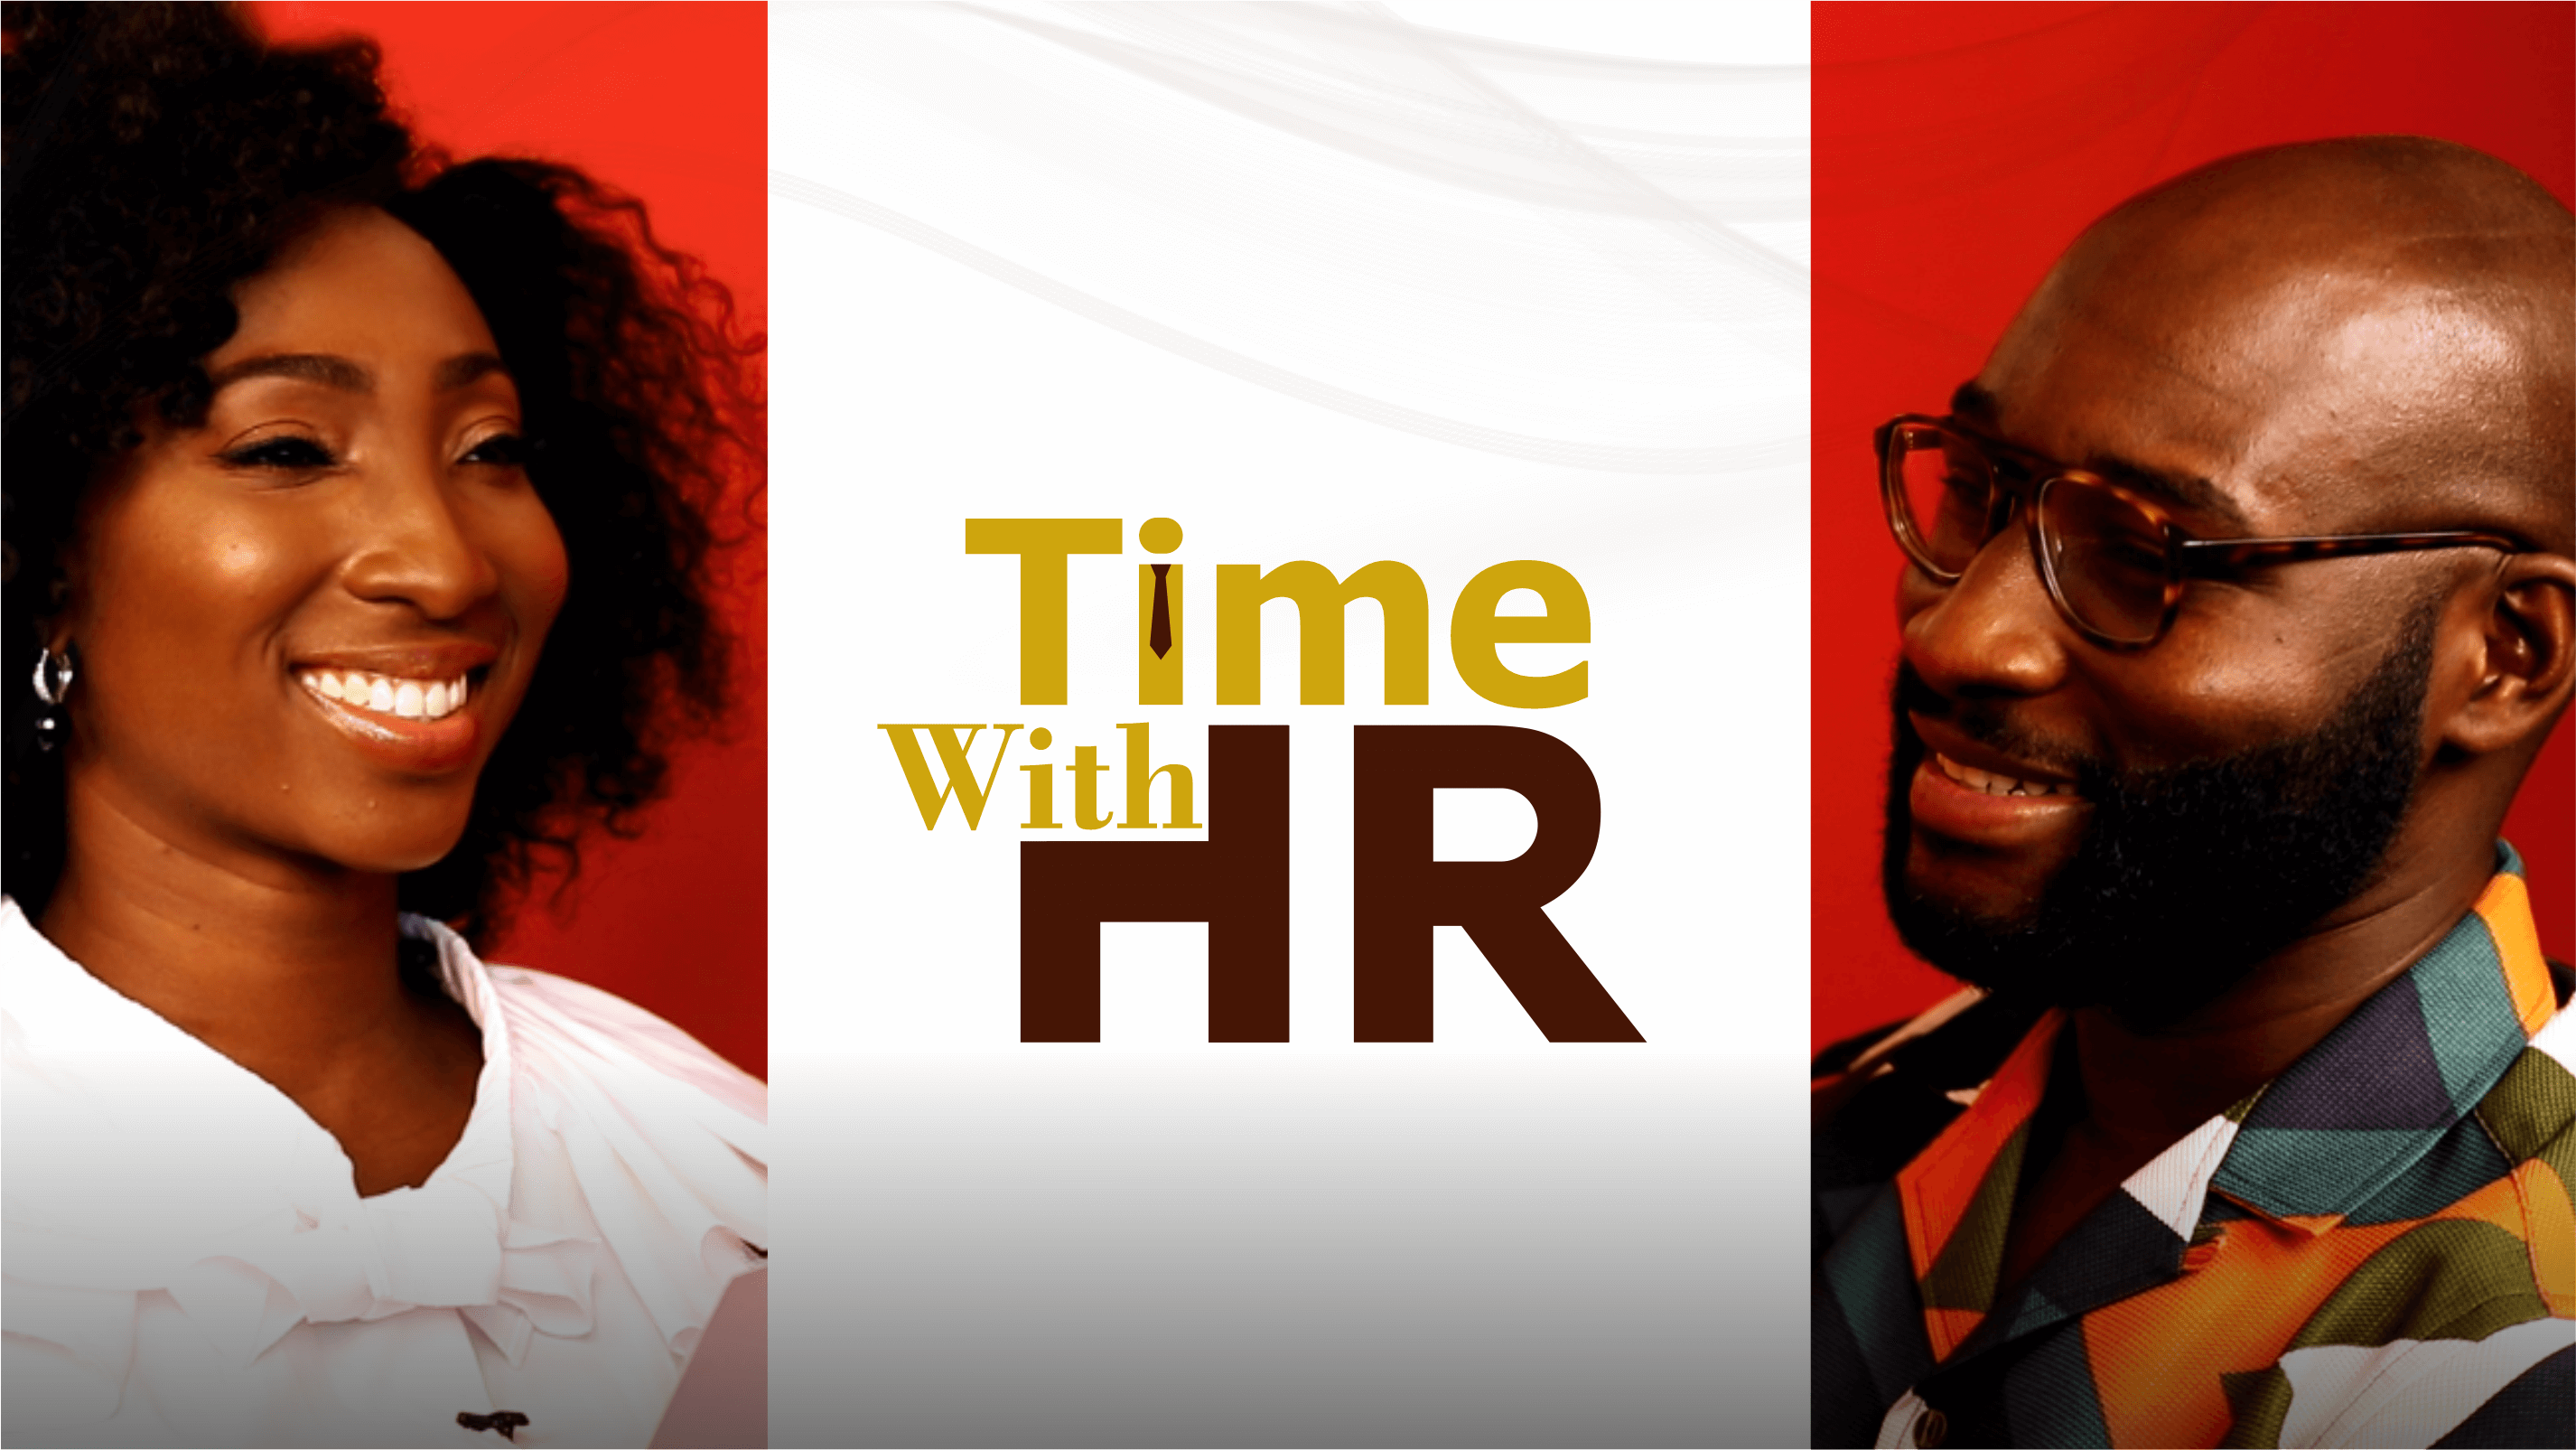 Kennedy Agyapong, Selorm Adadevoh, Adjetey Anang, Others share Career Advice in new Show 'Time with HR'